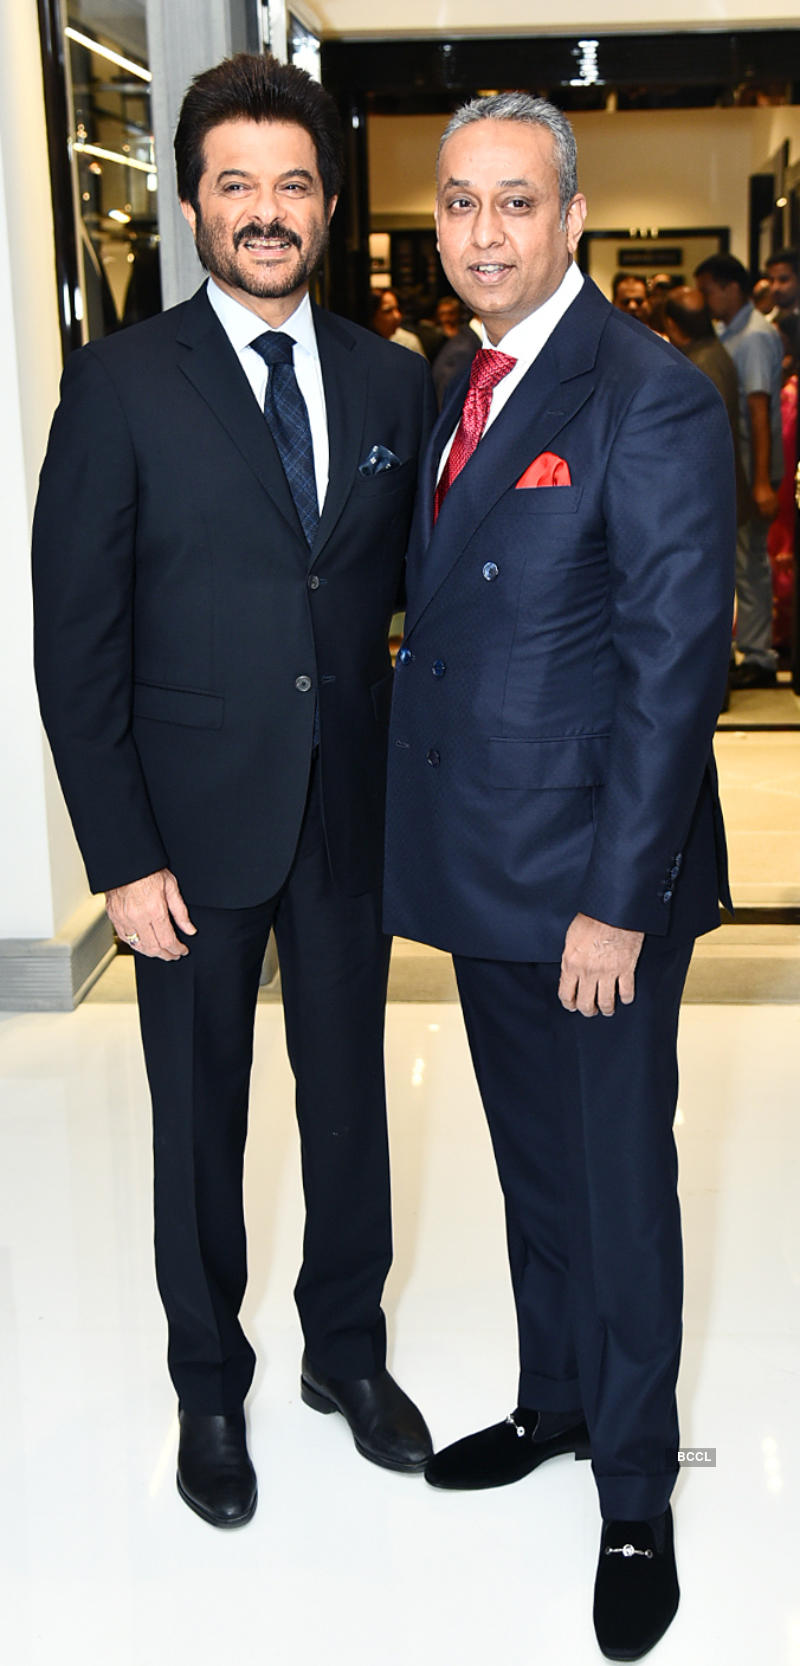 Kapoor family graces the launch of a fashion store